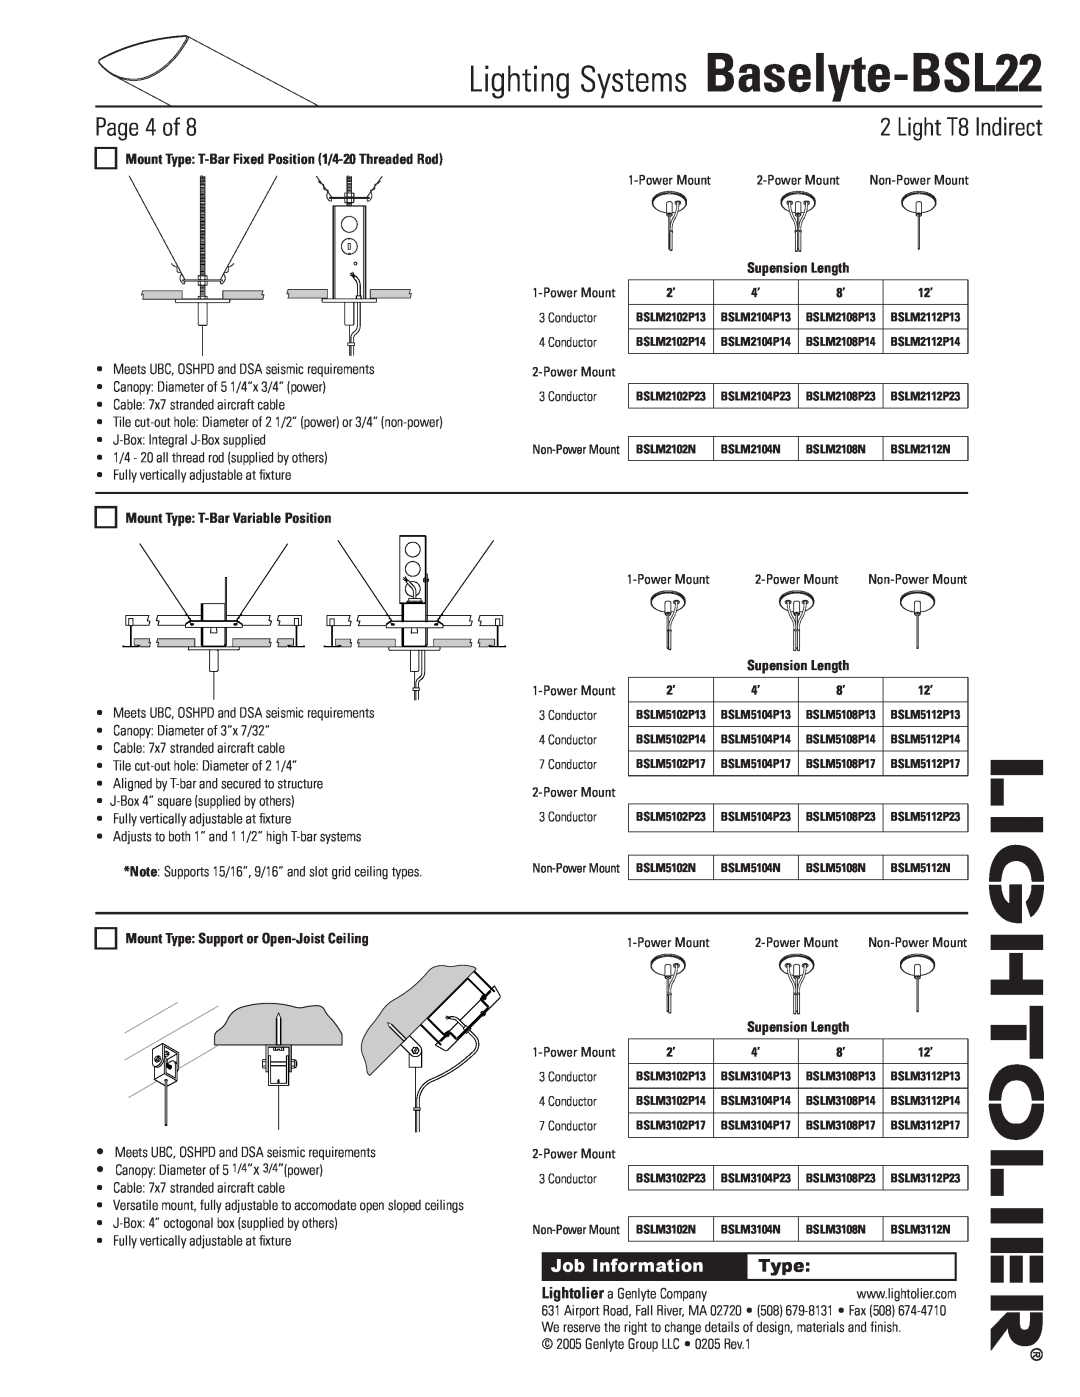 Lightolier Baselyte-BSL22 Mount Type T-BarVariable Position, Mount Type Support or Open-JoistCeiling, Page of 